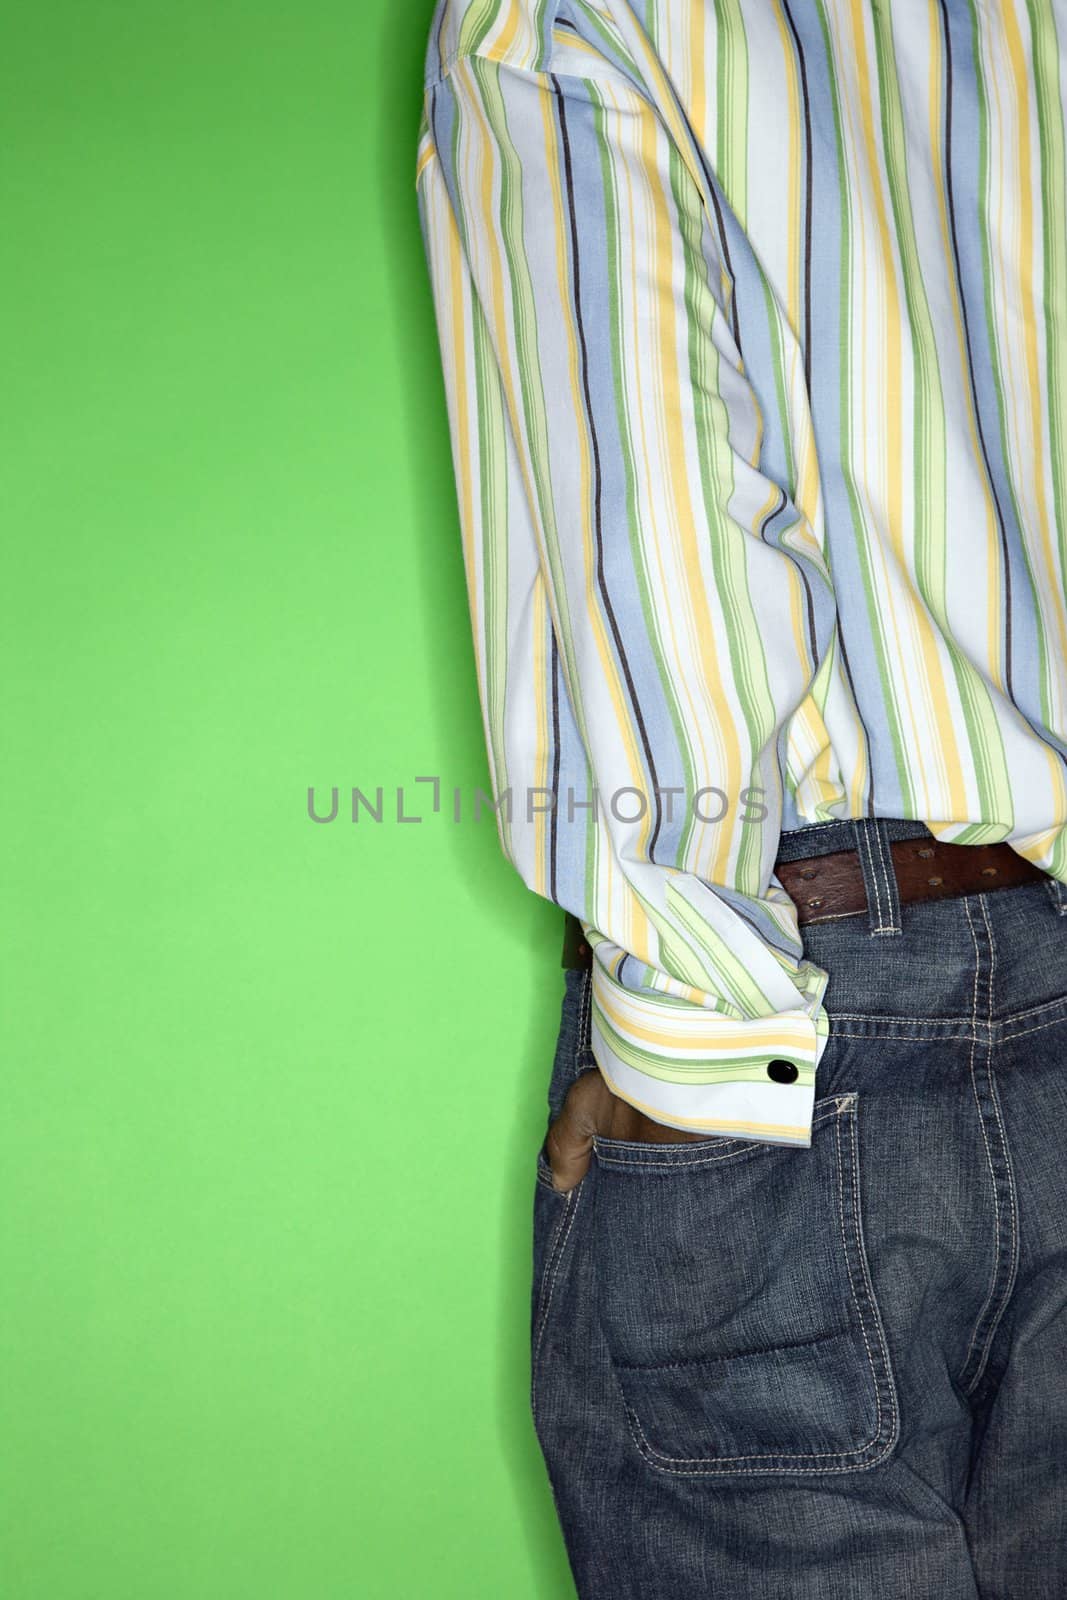 Back view torso of African-American teen boy with hand in back pocket of jeans standing against green background.